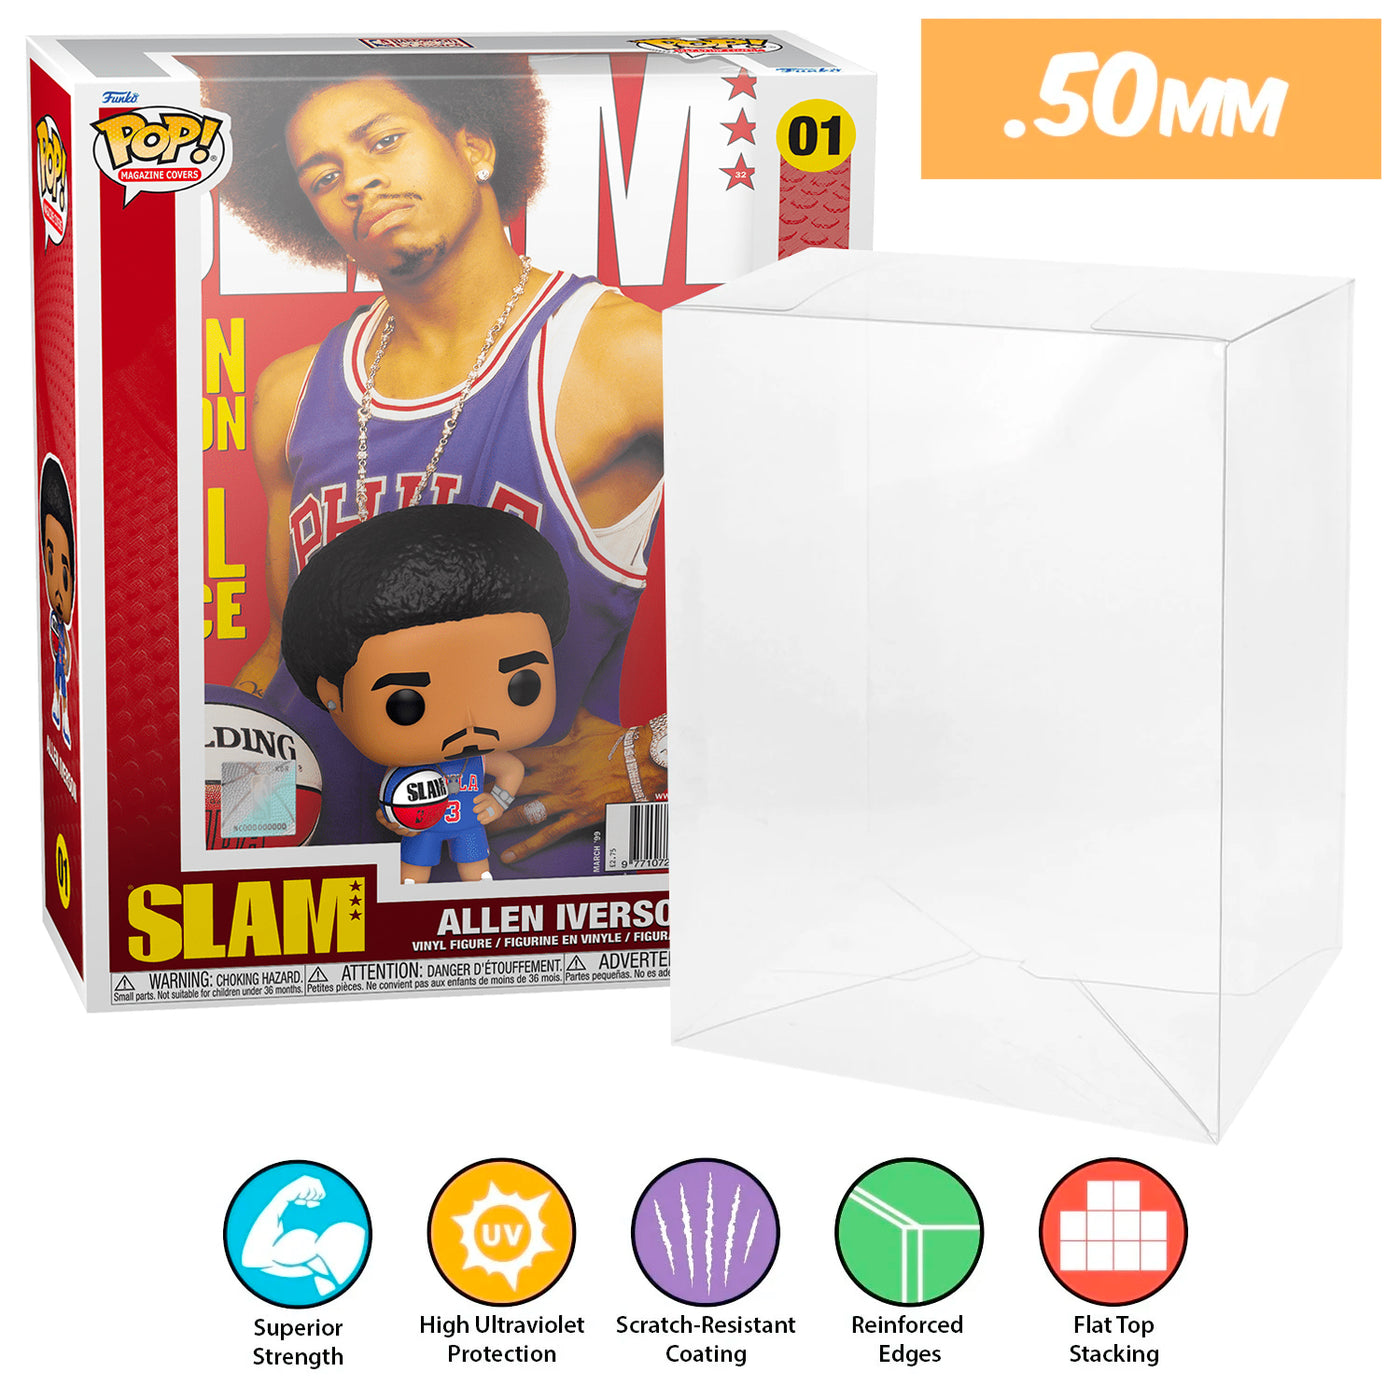 01 allen iverson pop magazines covers slam nba best funko pop protectors thick strong uv scratch flat top stack vinyl display geek plastic shield vaulted eco armor fits collect protect display case kollector protector